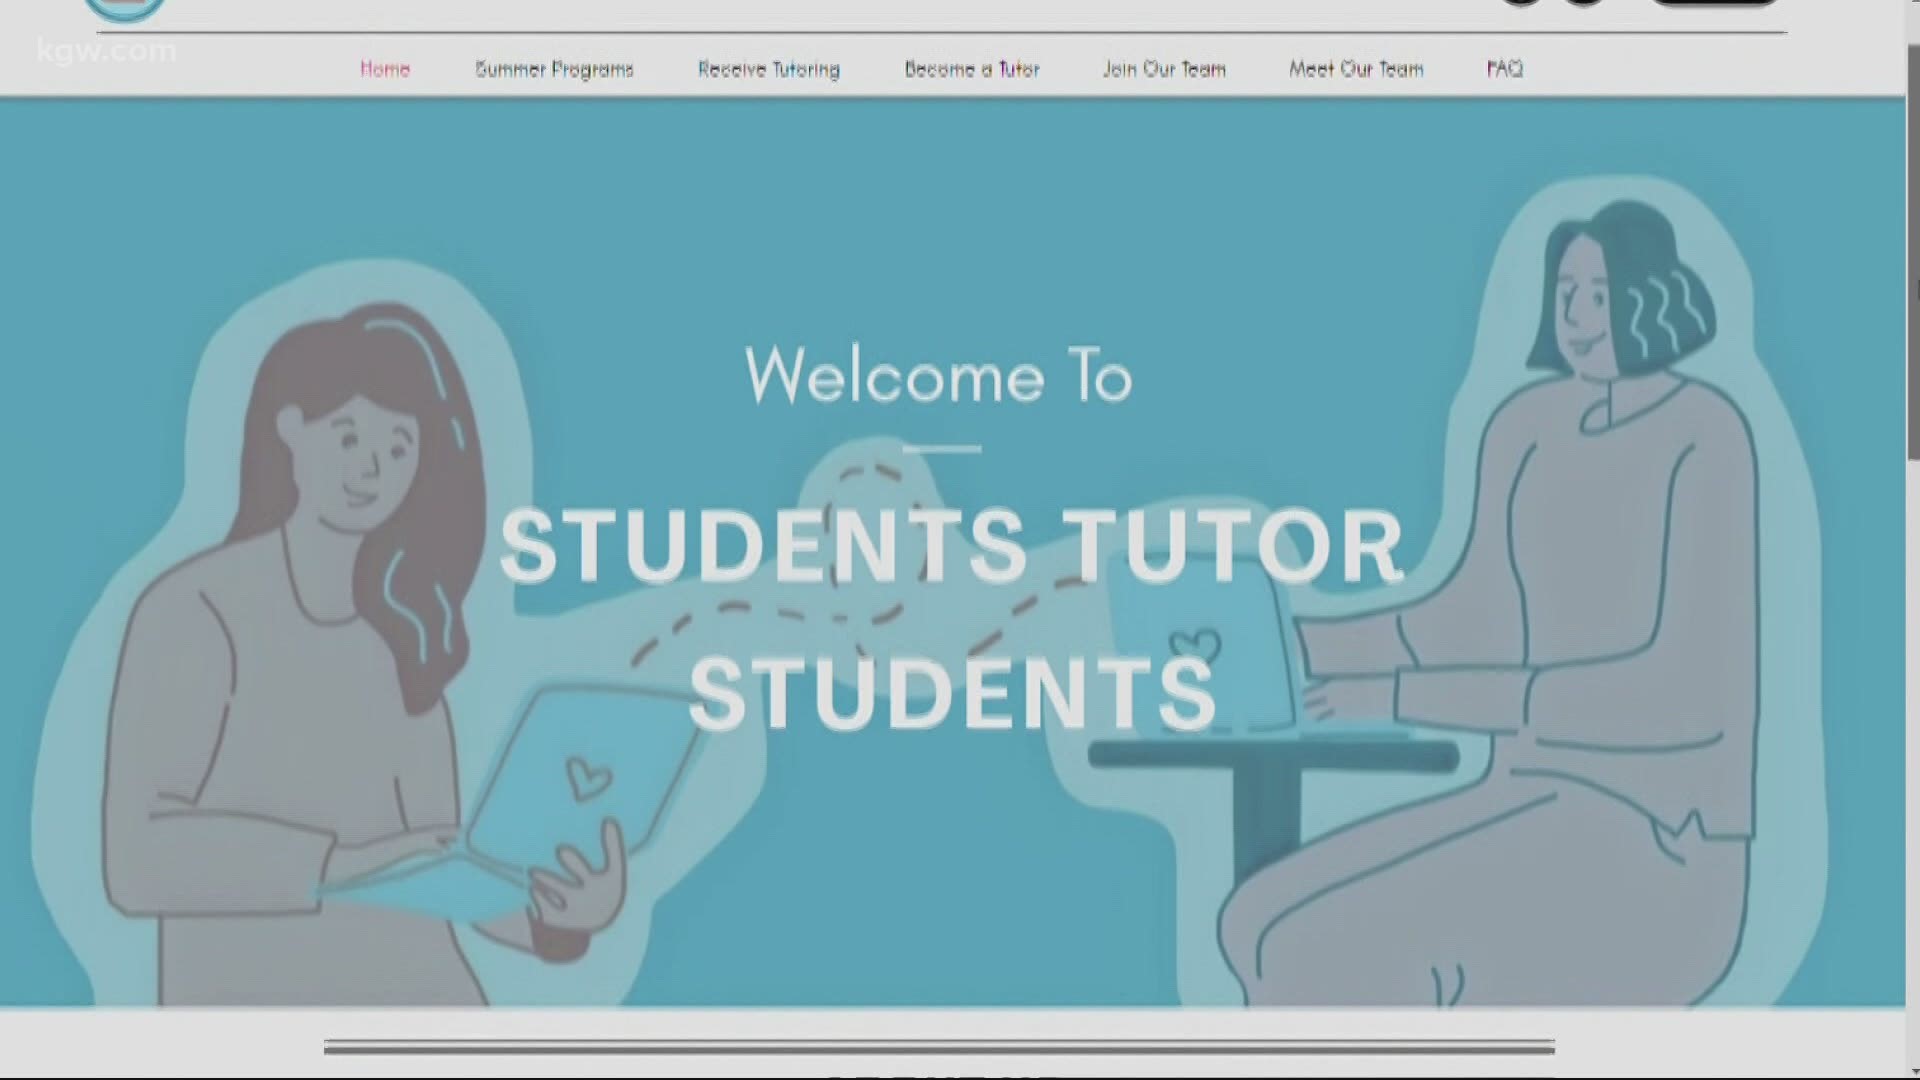 There's help for students struggling wiht online learning, and it's coming courtesy of other students.